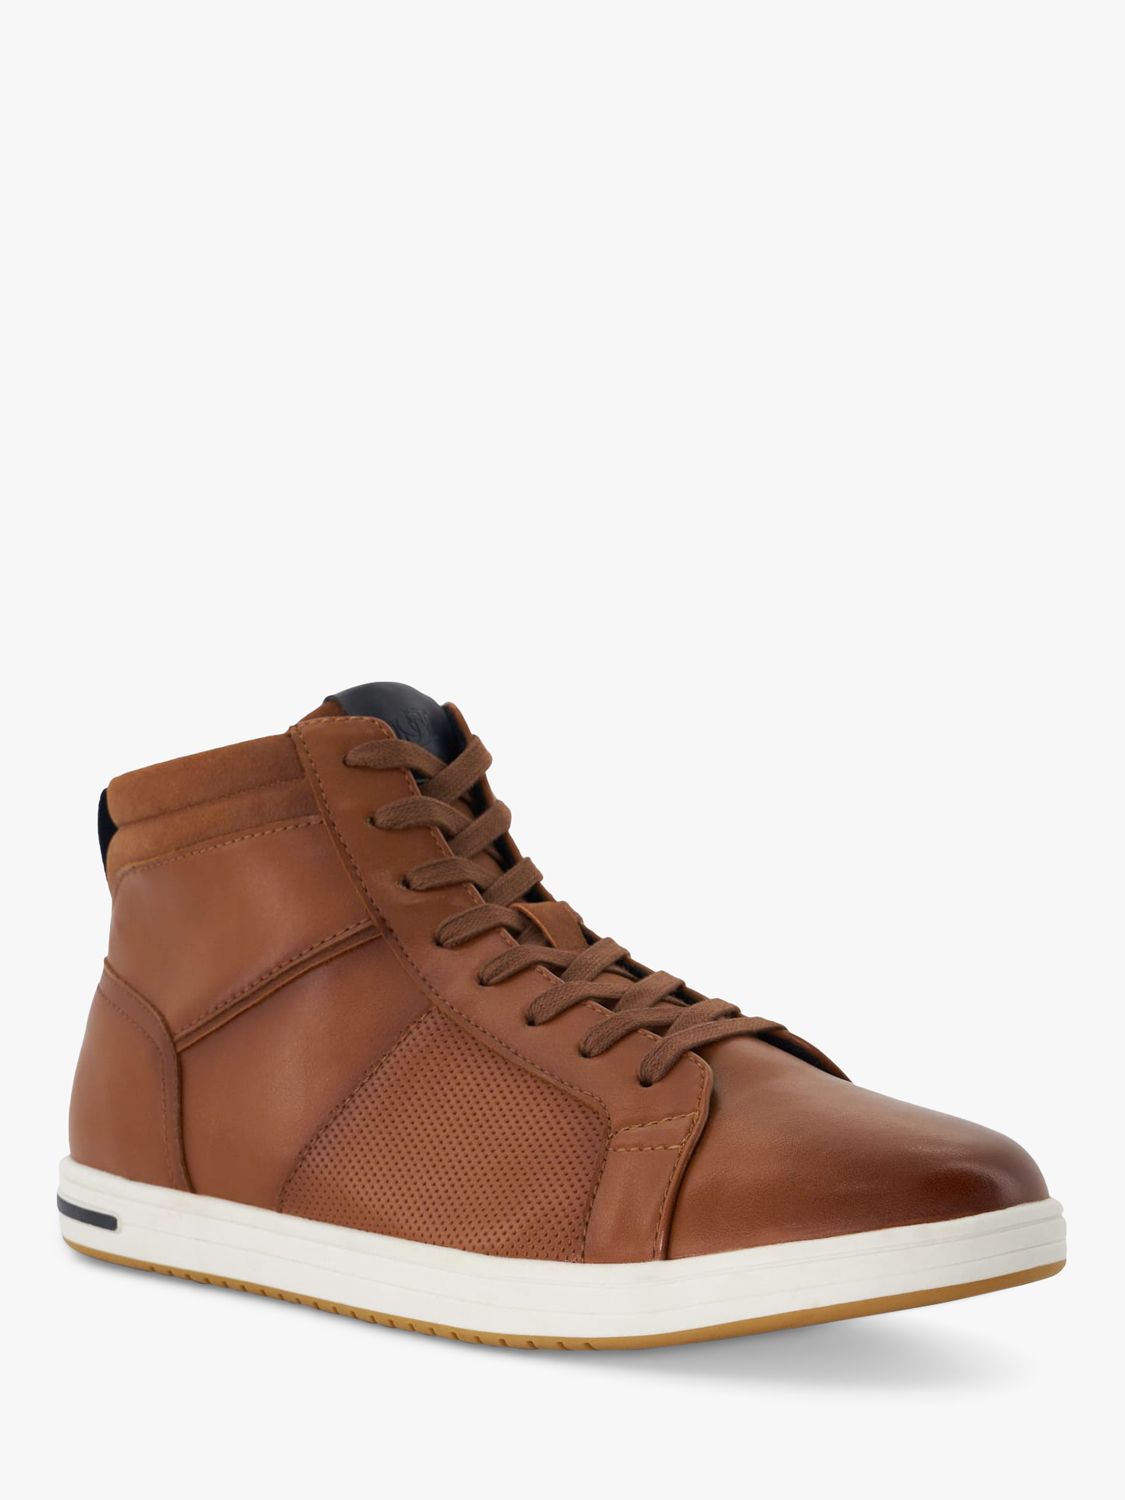 Dune Sezzy Synthetic High-Top Trainers, Tan, EU40